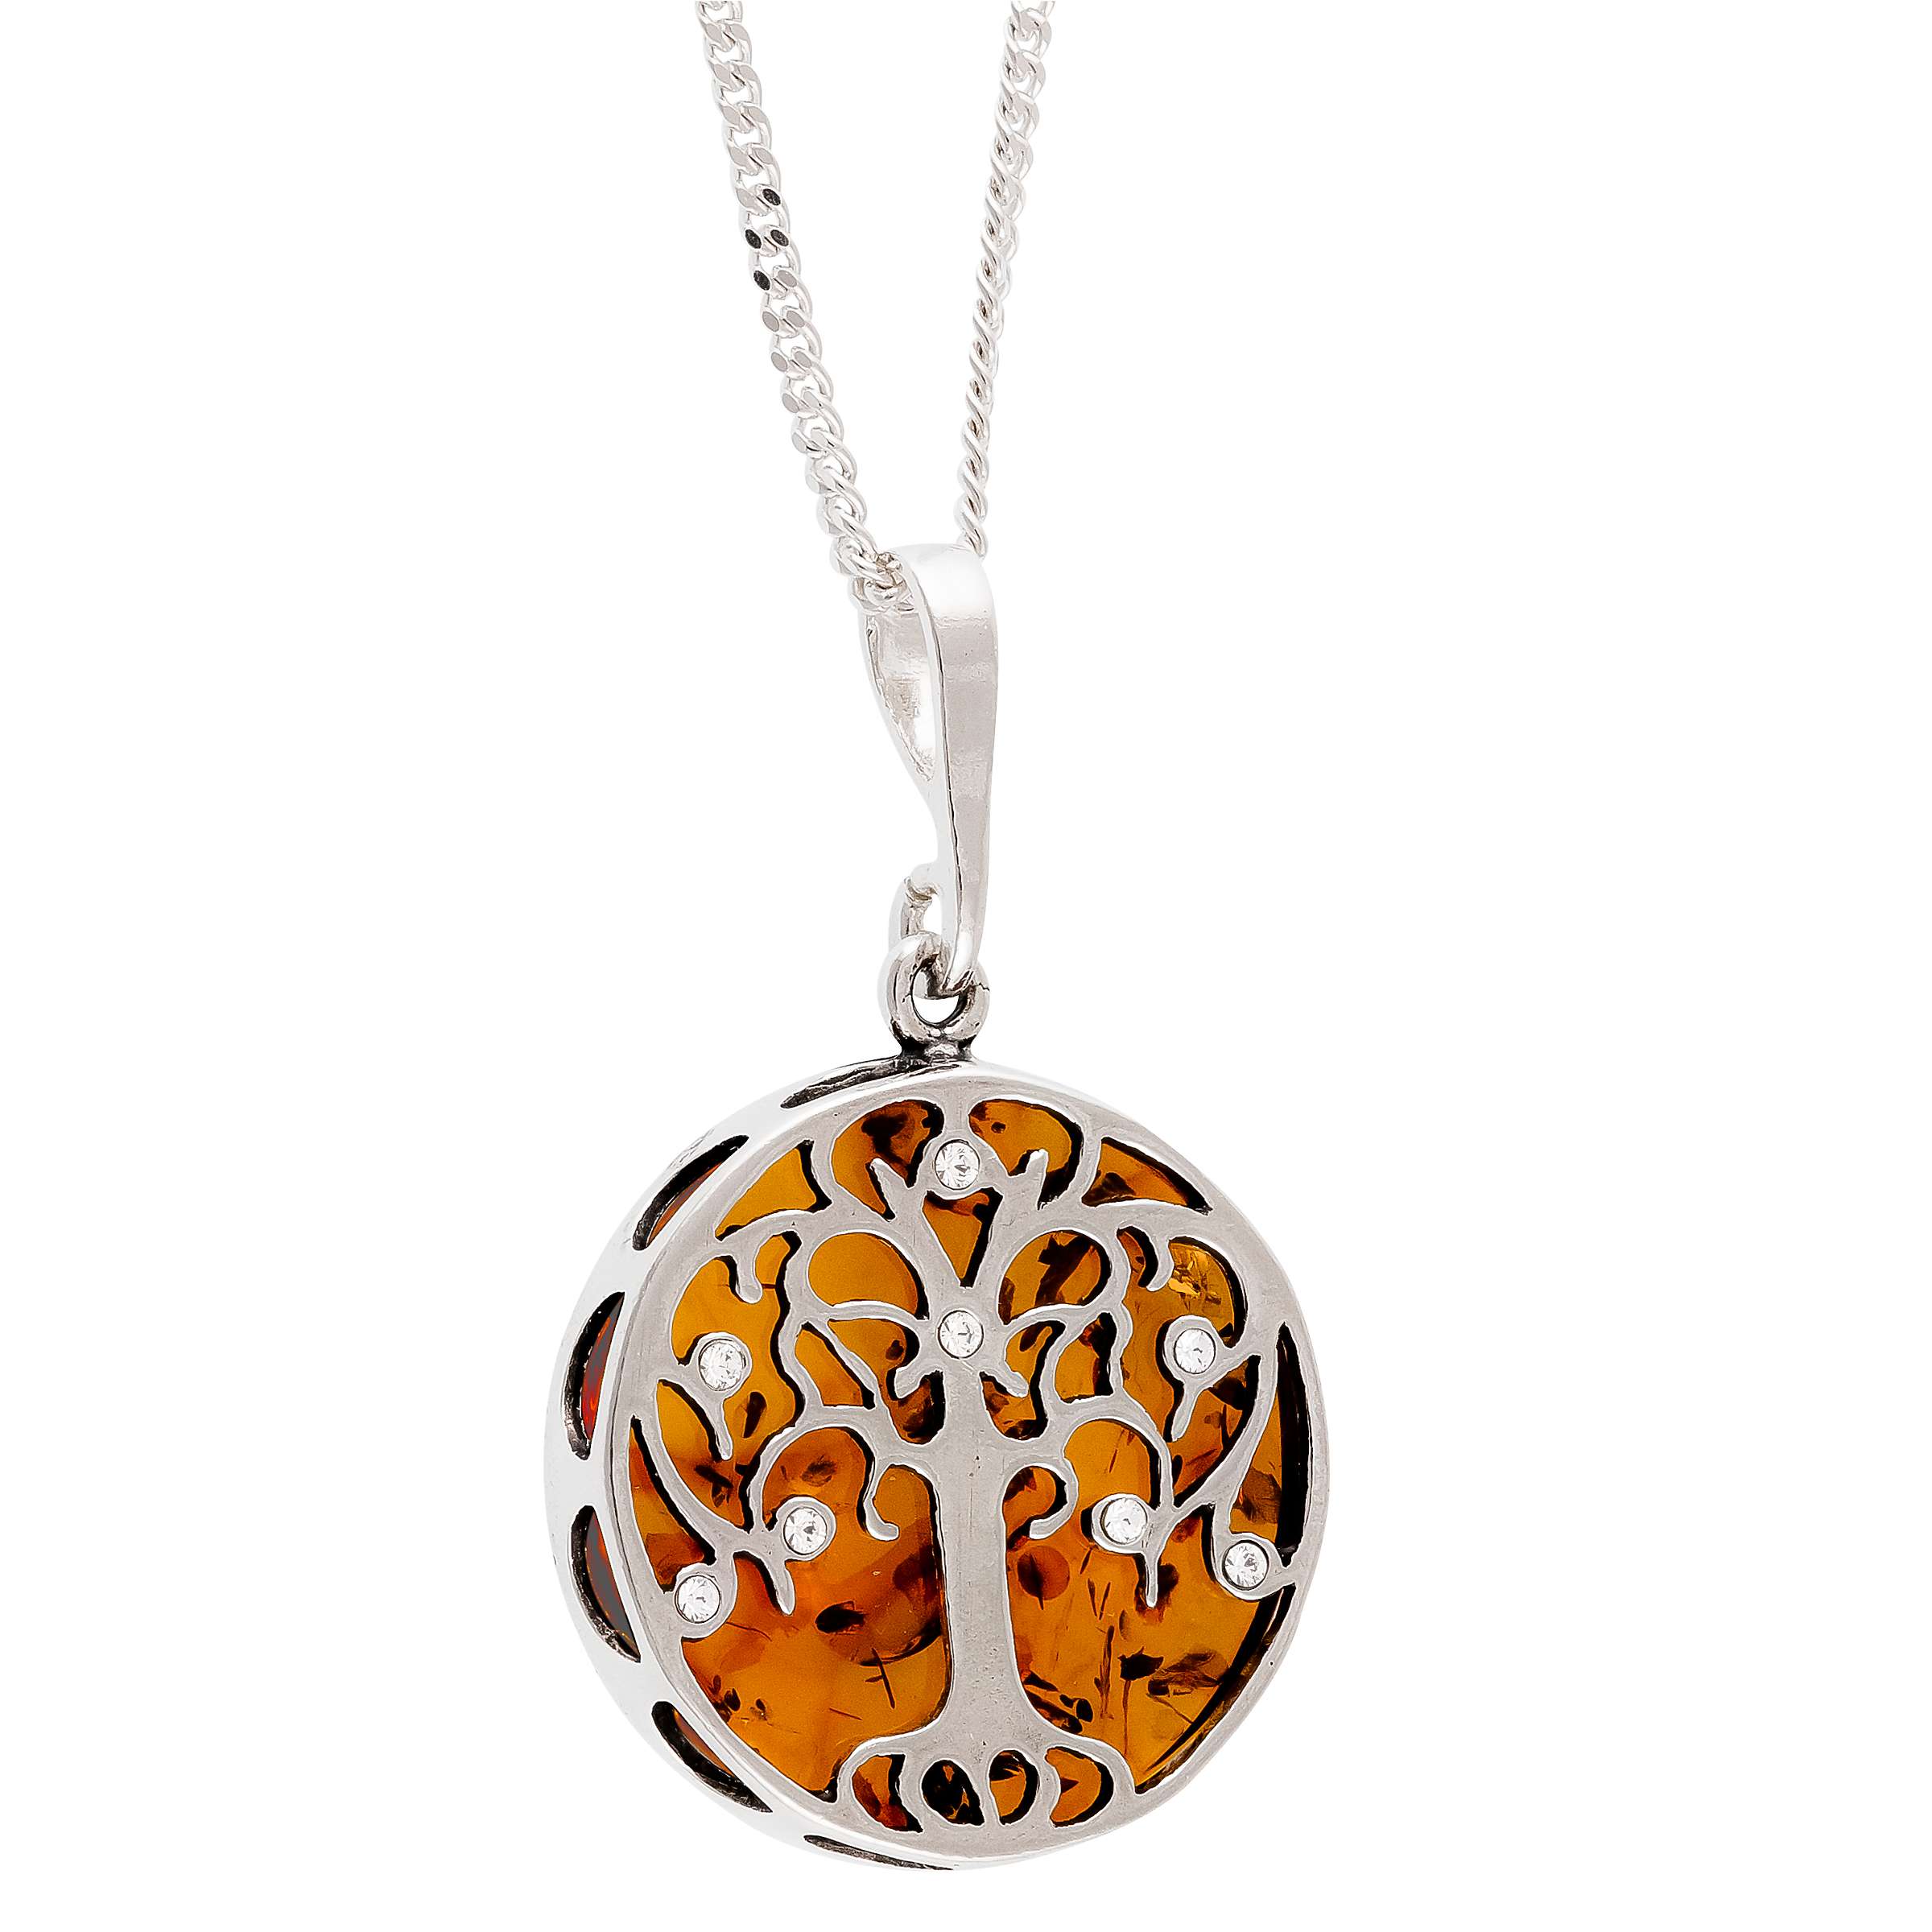 Embers Chain and Dichroic Pendant Necklace Shimmering in Ambers and Oranges